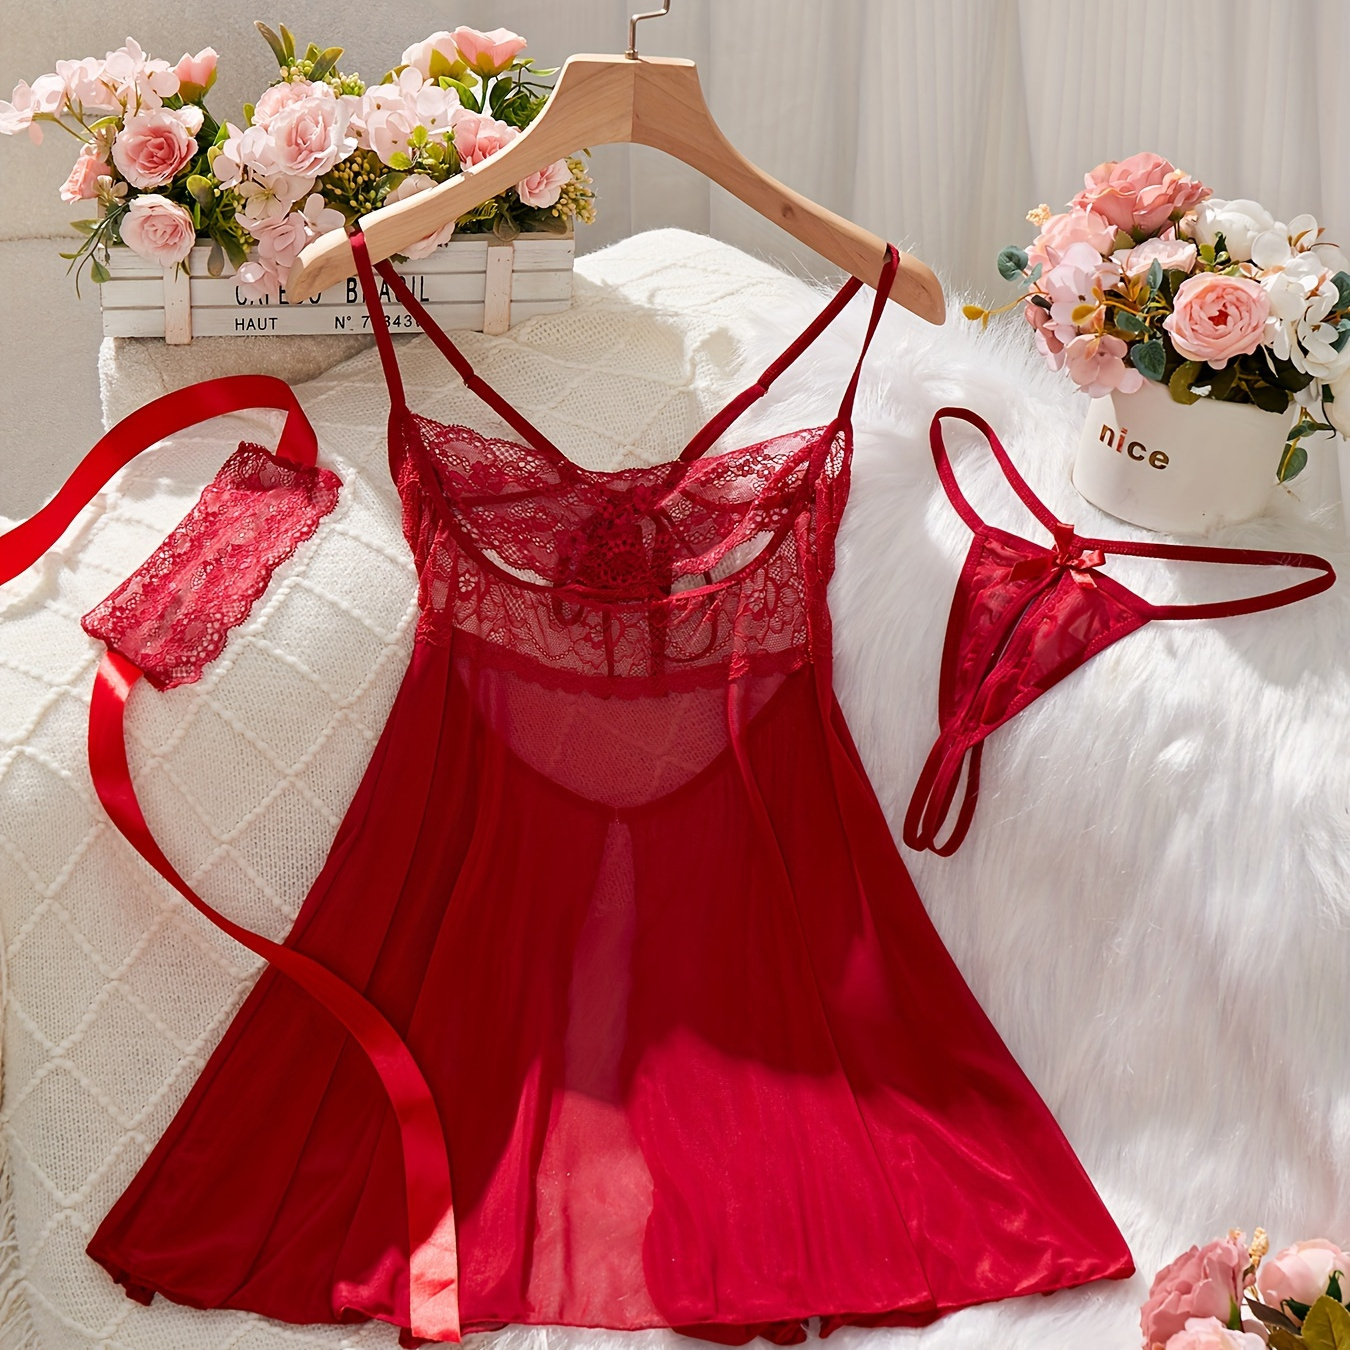 

Women's Sexy Solid Red Lingerie Set, Babydoll Dress, G-string Panty & Eye Mask, Sheer Lace Detail, Satin Ribbon Accents For Boudoir - Seductive Bedroom Attire